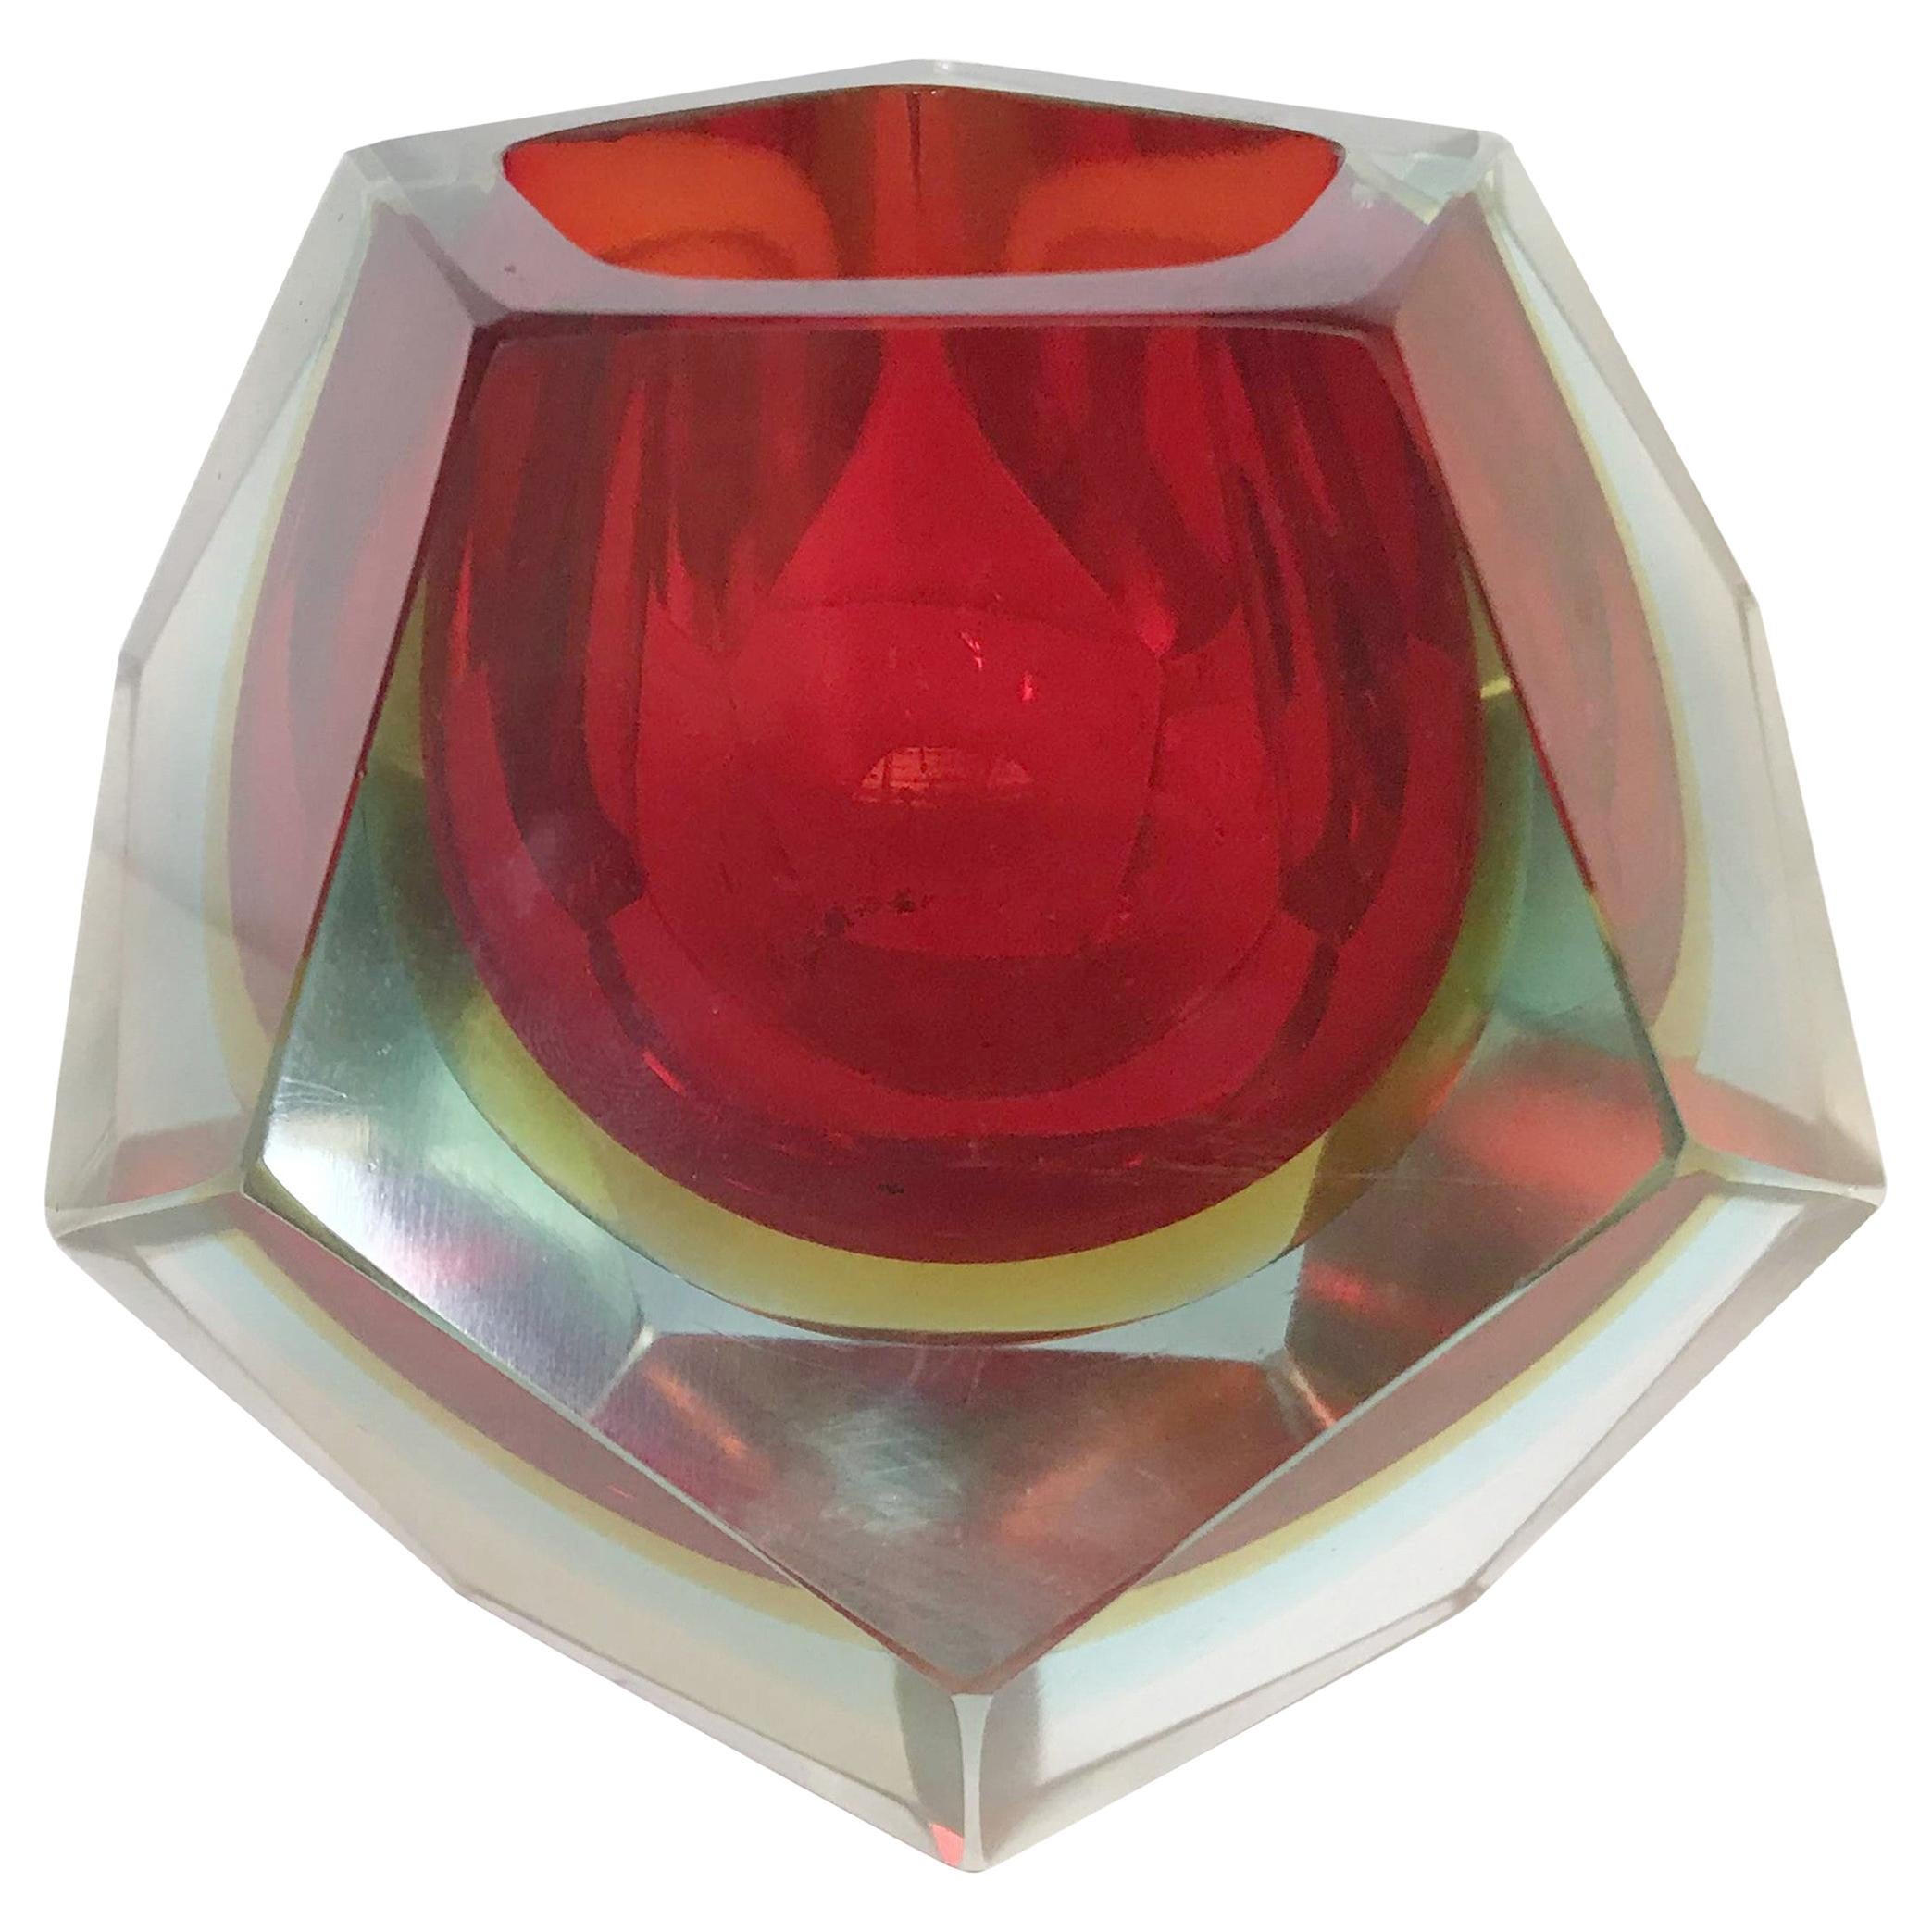 Red Faceted Sommerso Bowl by Mandruzzato FINAL CLEARANCE SALE